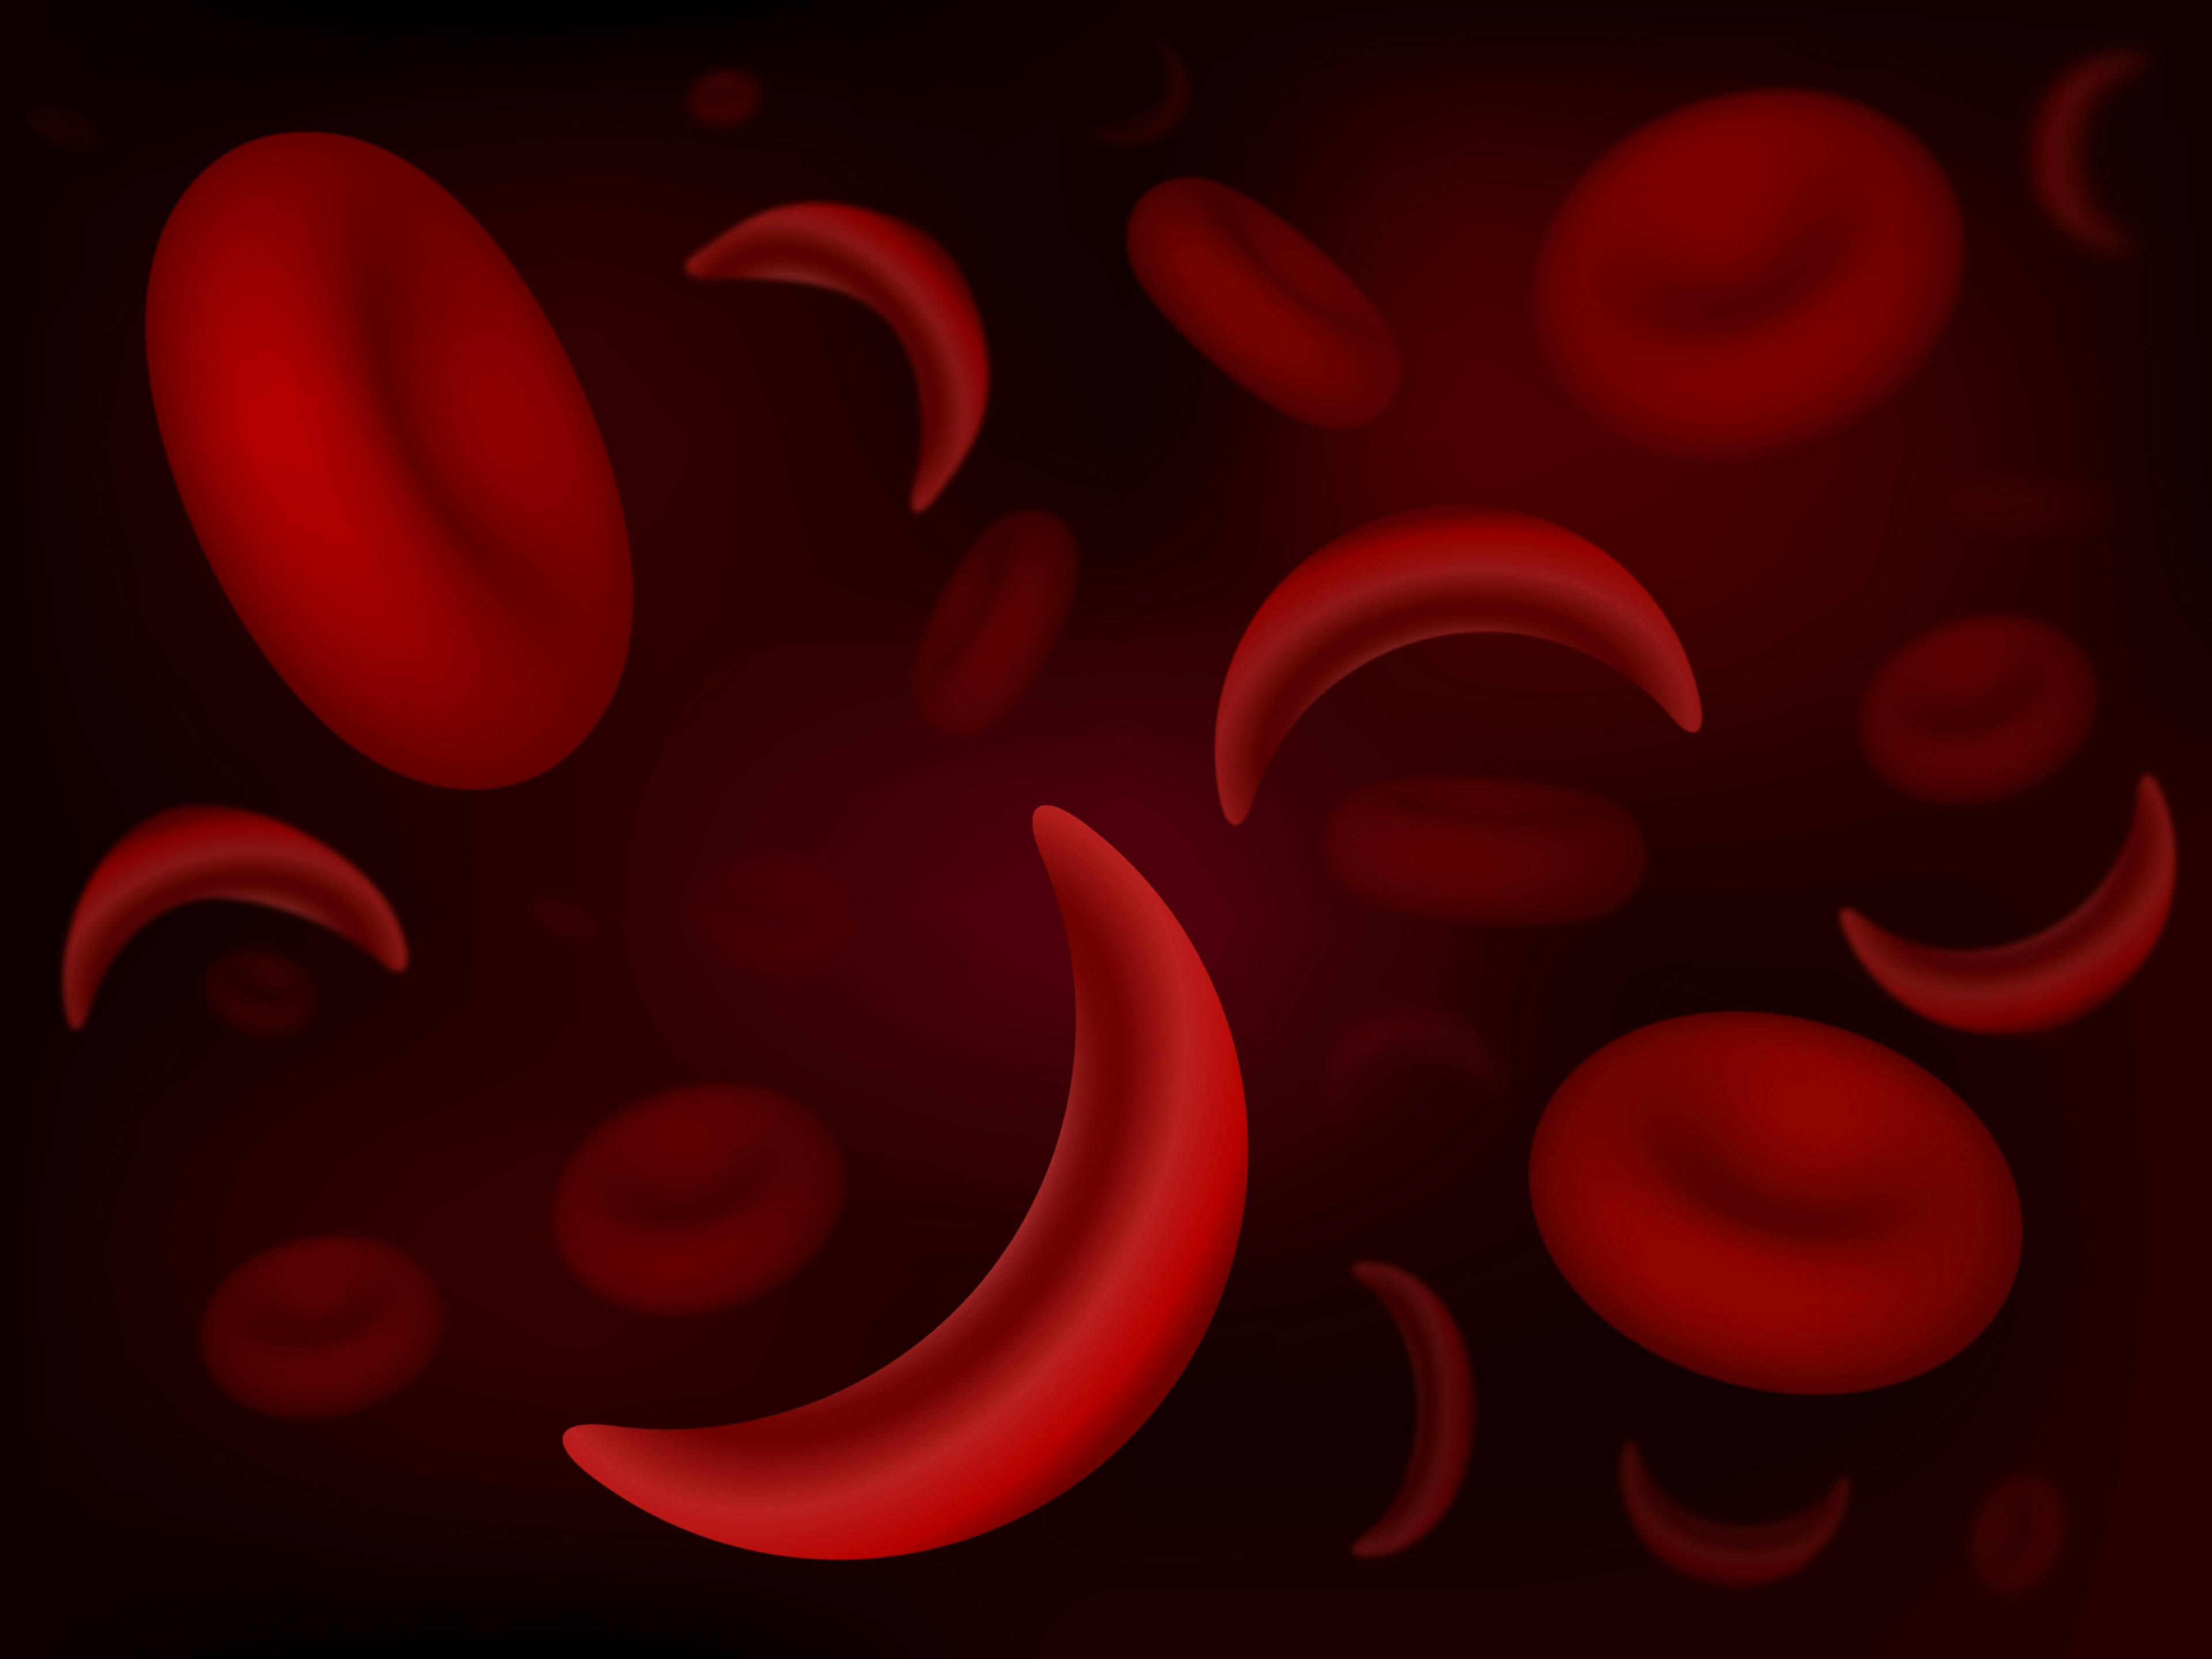 bluebird bio Sickle Cell Gene Therapy On Hold Following Adverse Event